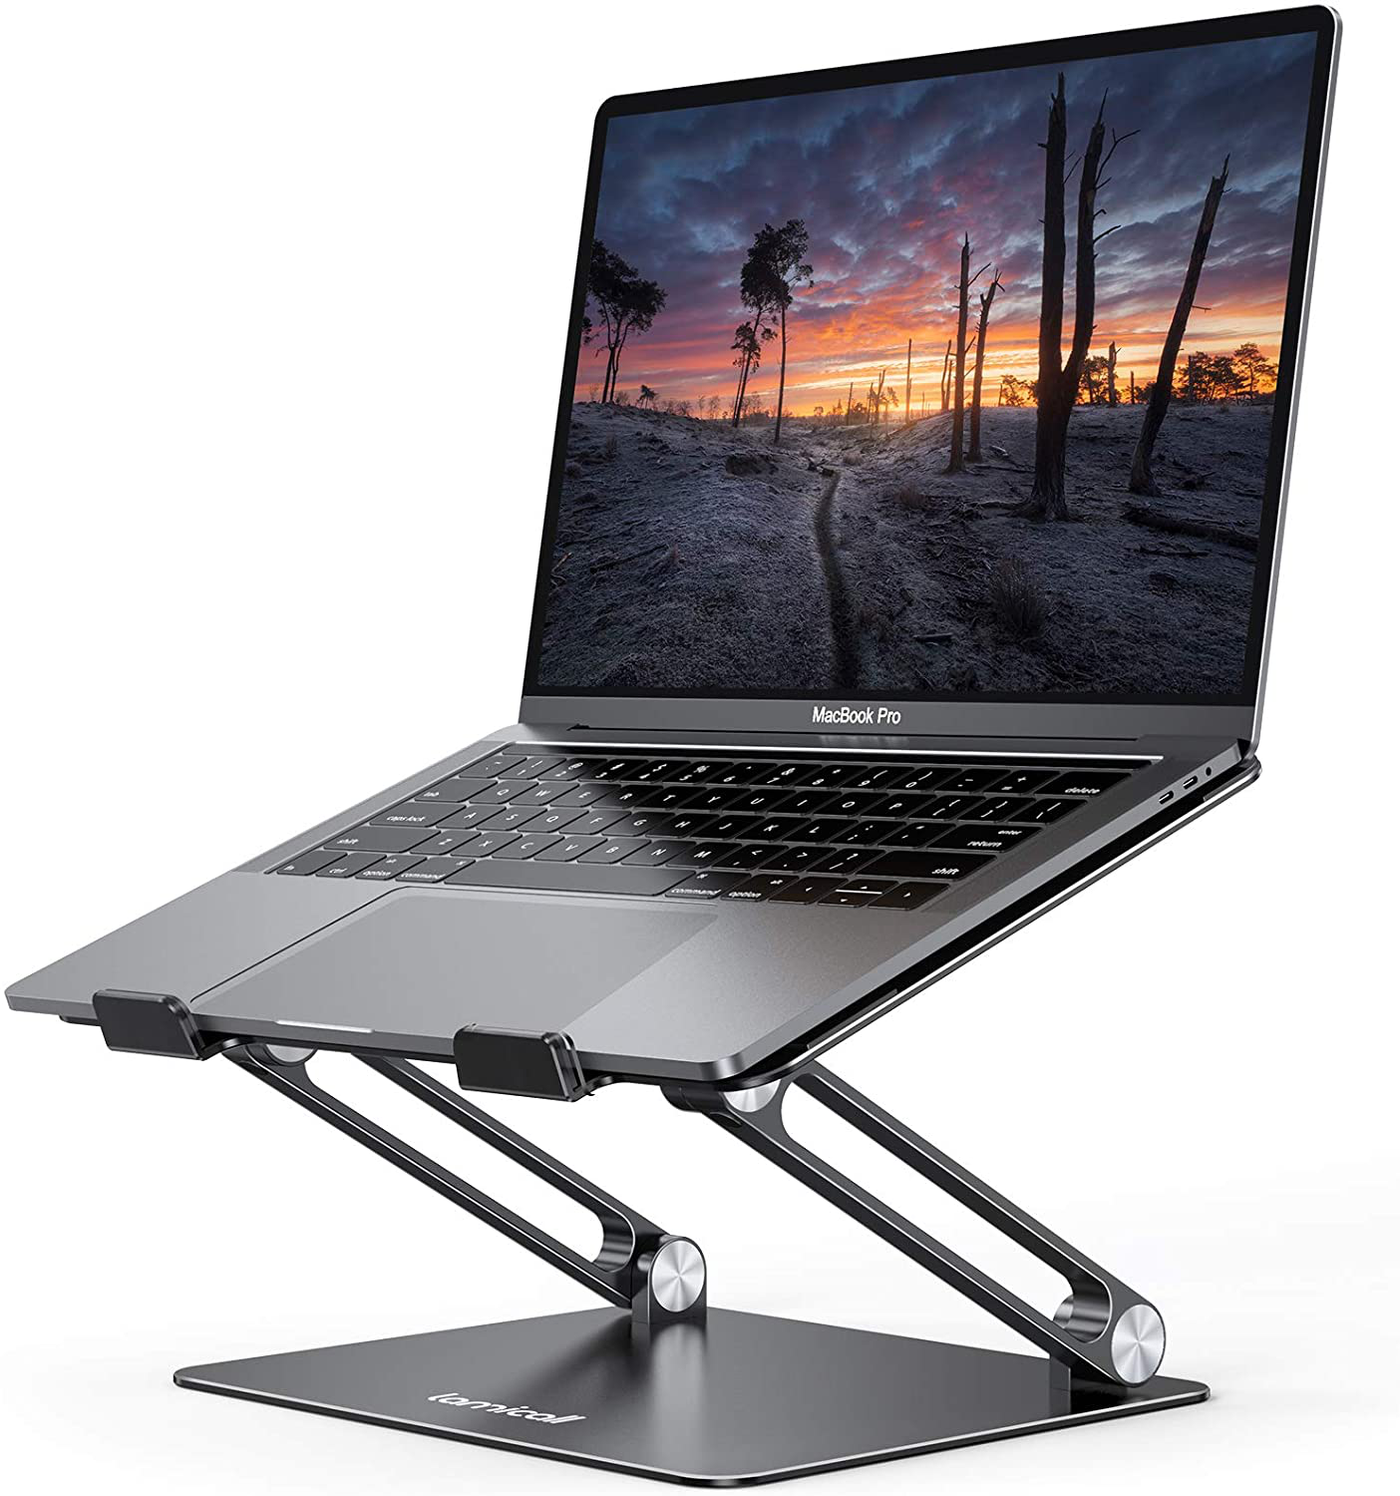 Lamicall Laptop Stand Riser Portable - Foldable Height Adjustable Ergonomic Computer Notebook Stand Holder Lift for Desk, Compatible with MacBook Air Pro, Dell XPS, HP (10-17'') - Silver